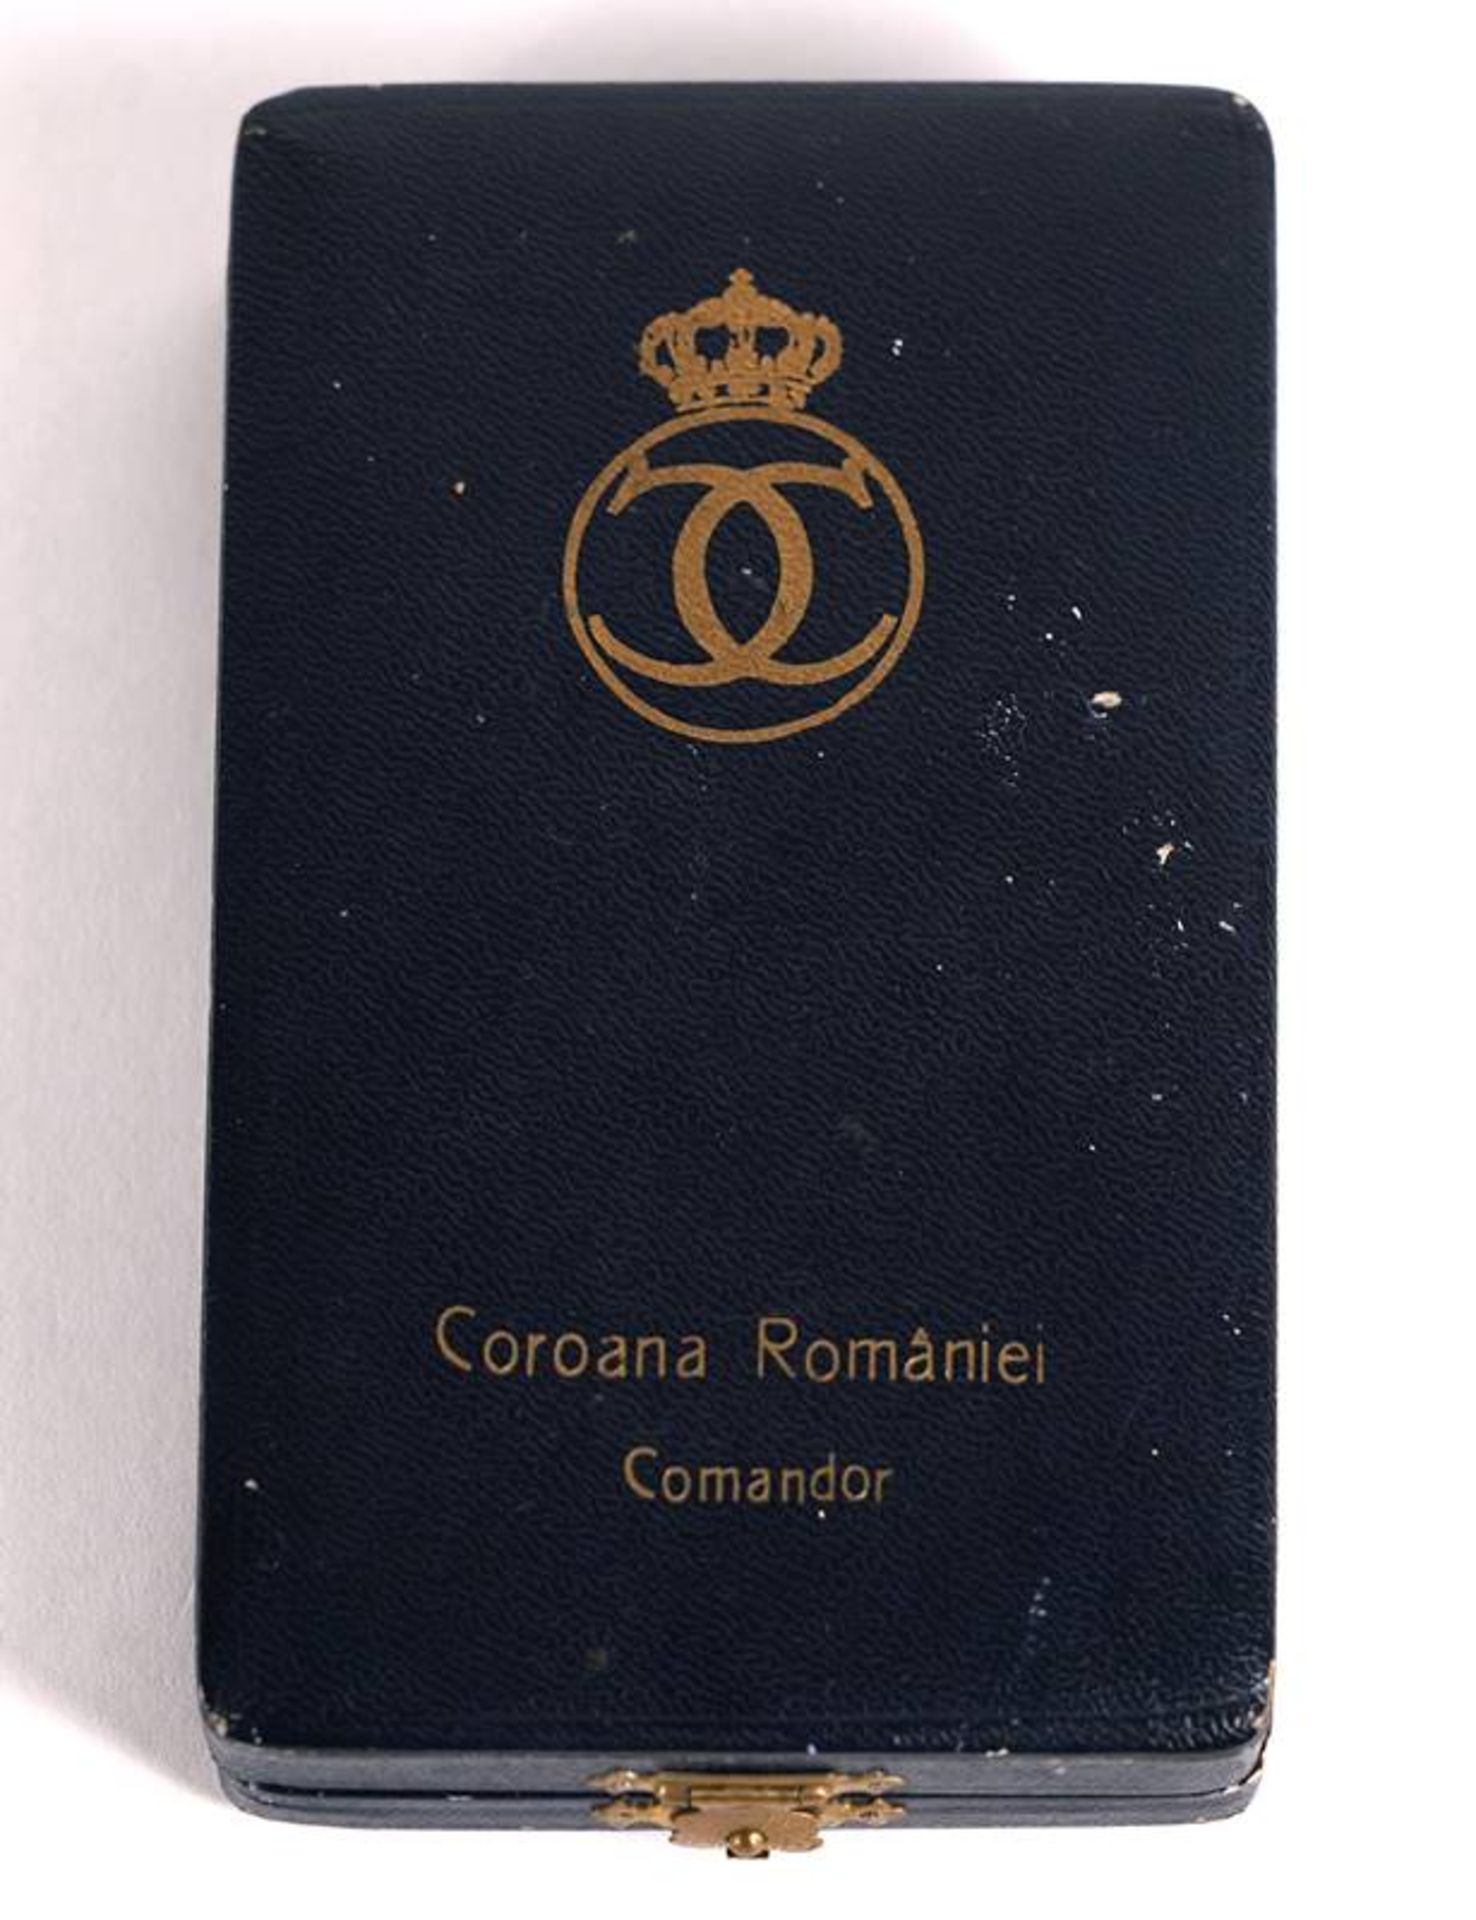 Order of the Crown of Romania - Image 5 of 5